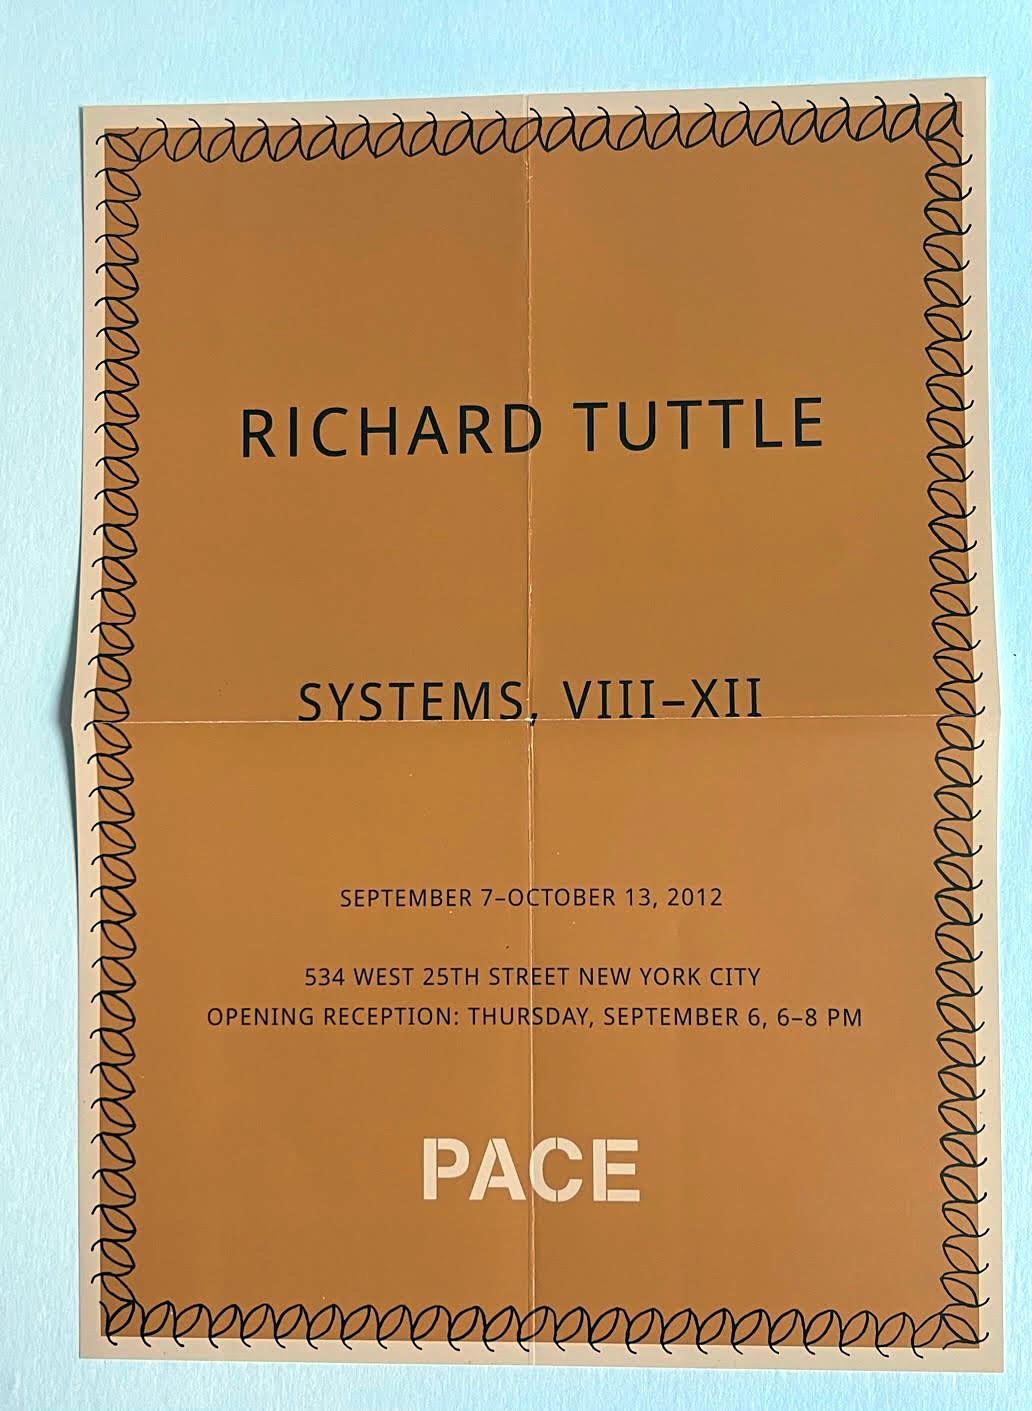 Hardback Monograph: The Art of Richard Tuttle (Hand signed, dated and inscribed) For Sale 19